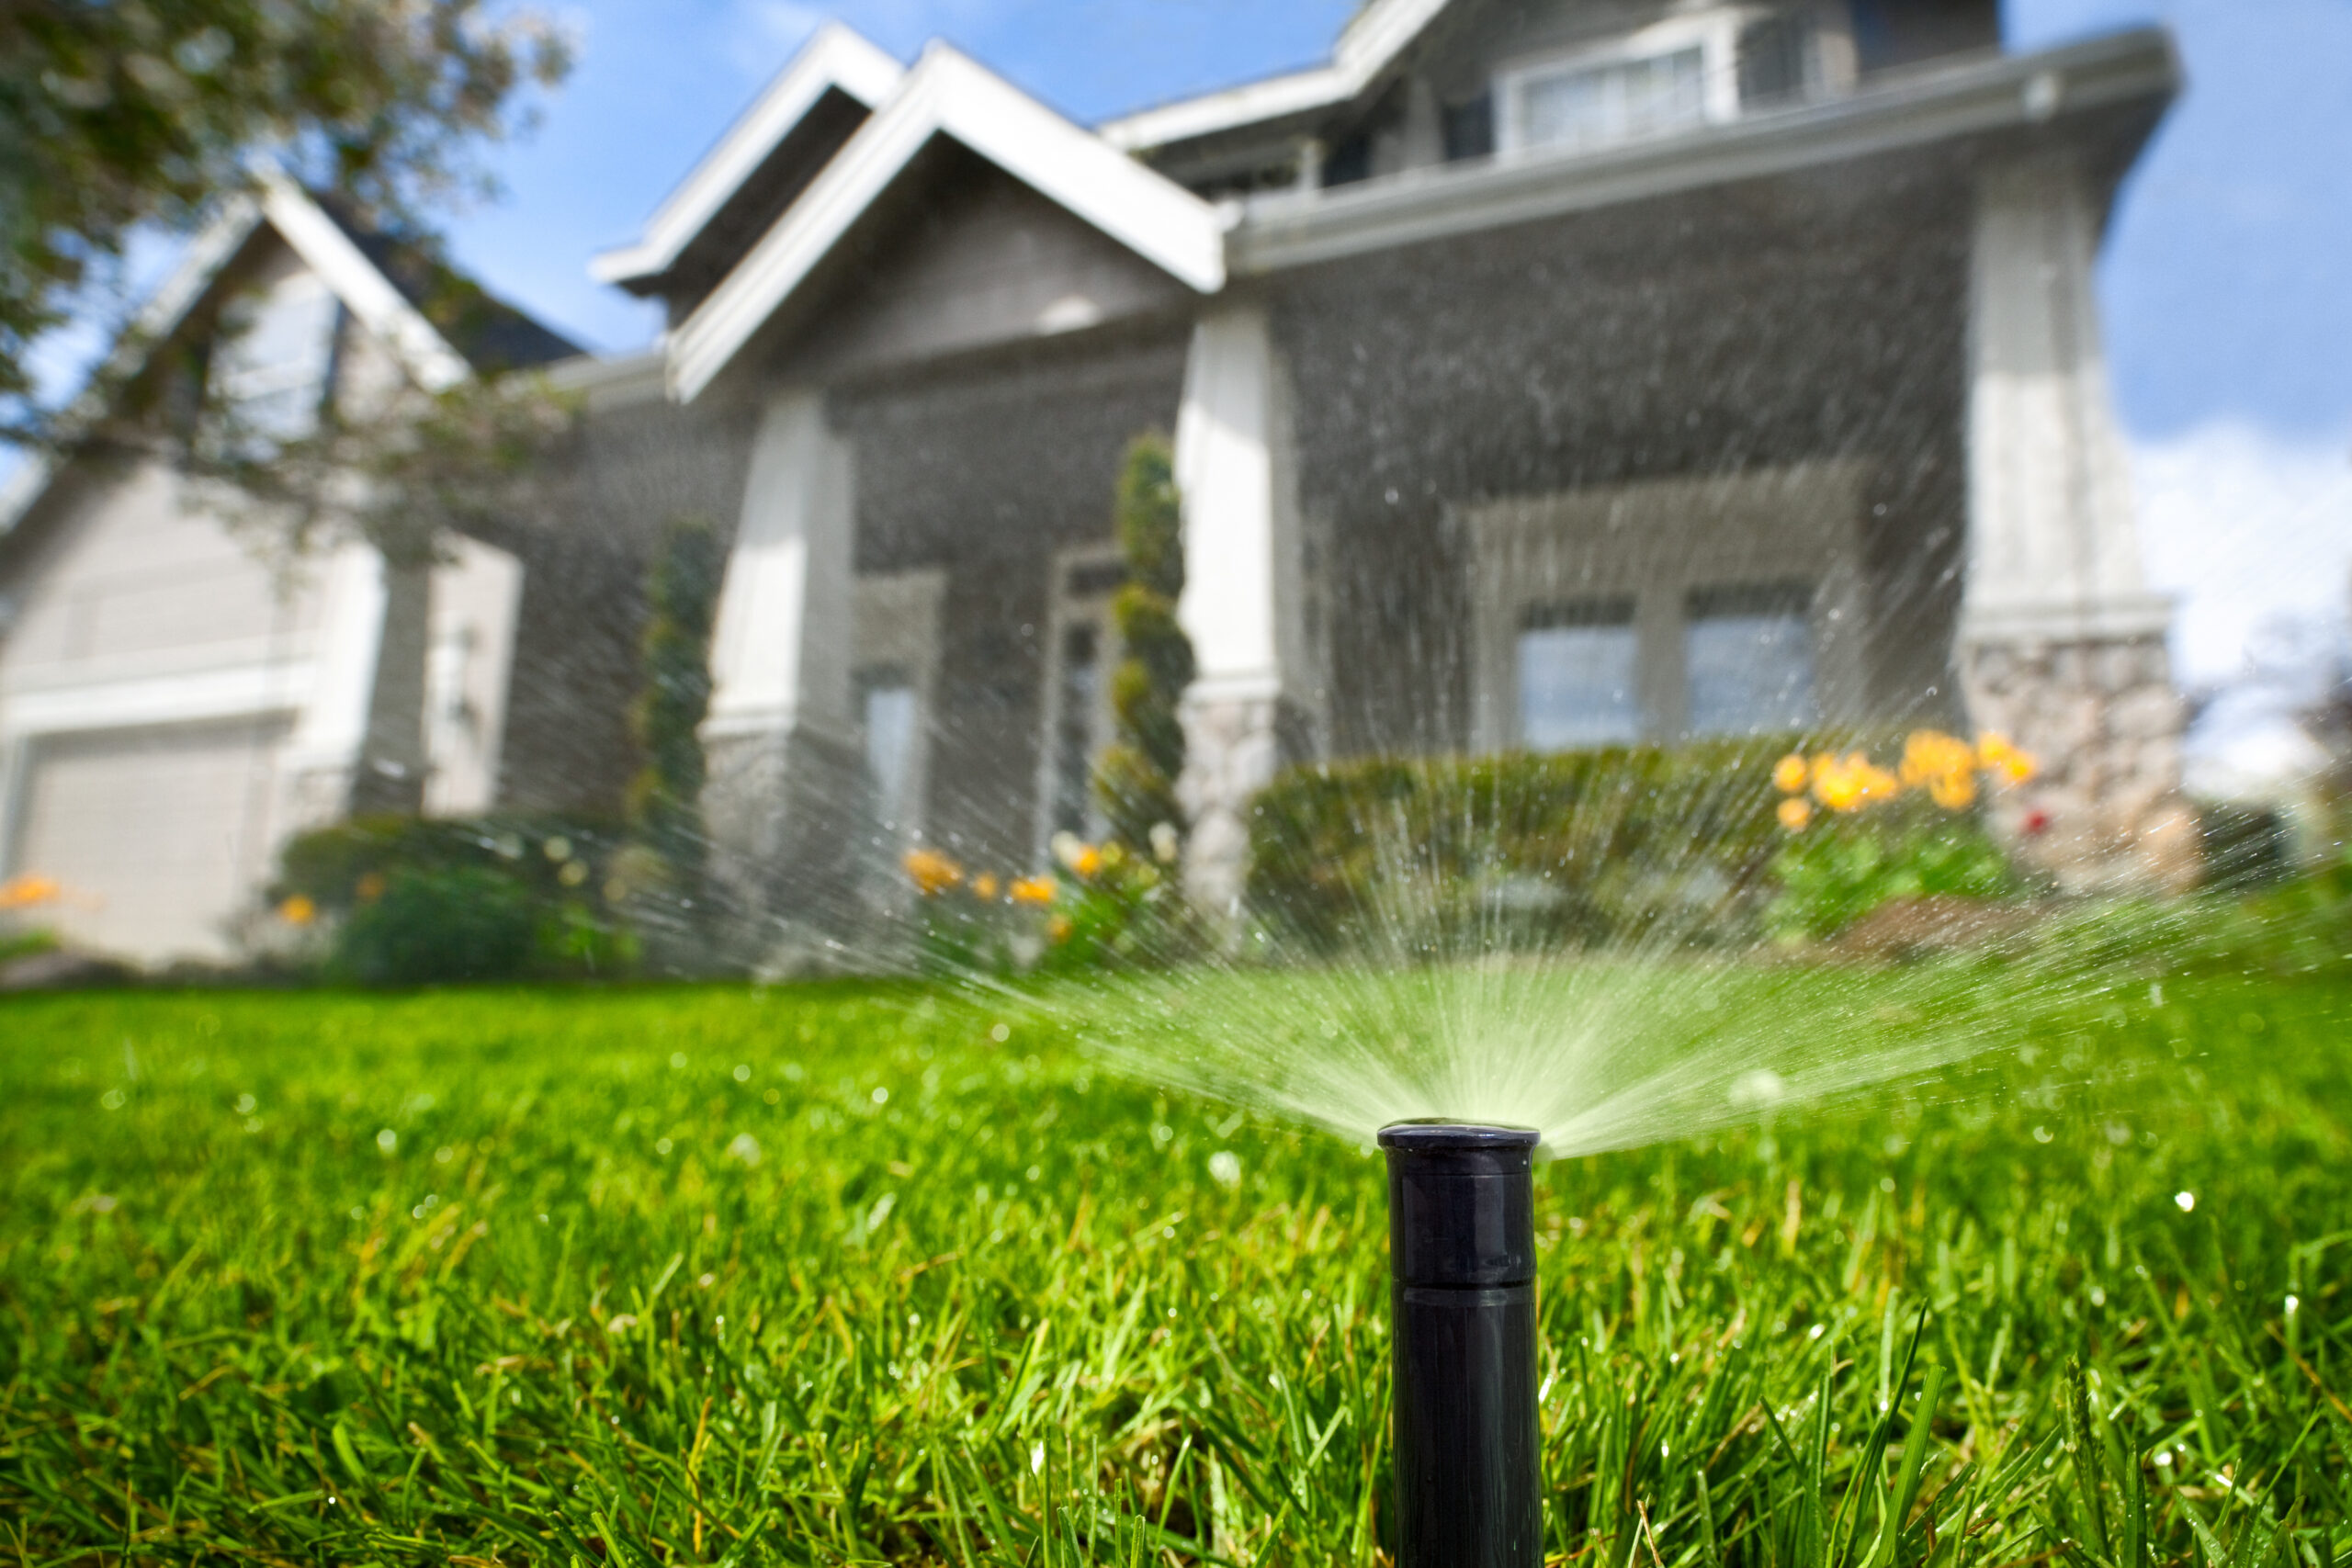 House with sprinkler